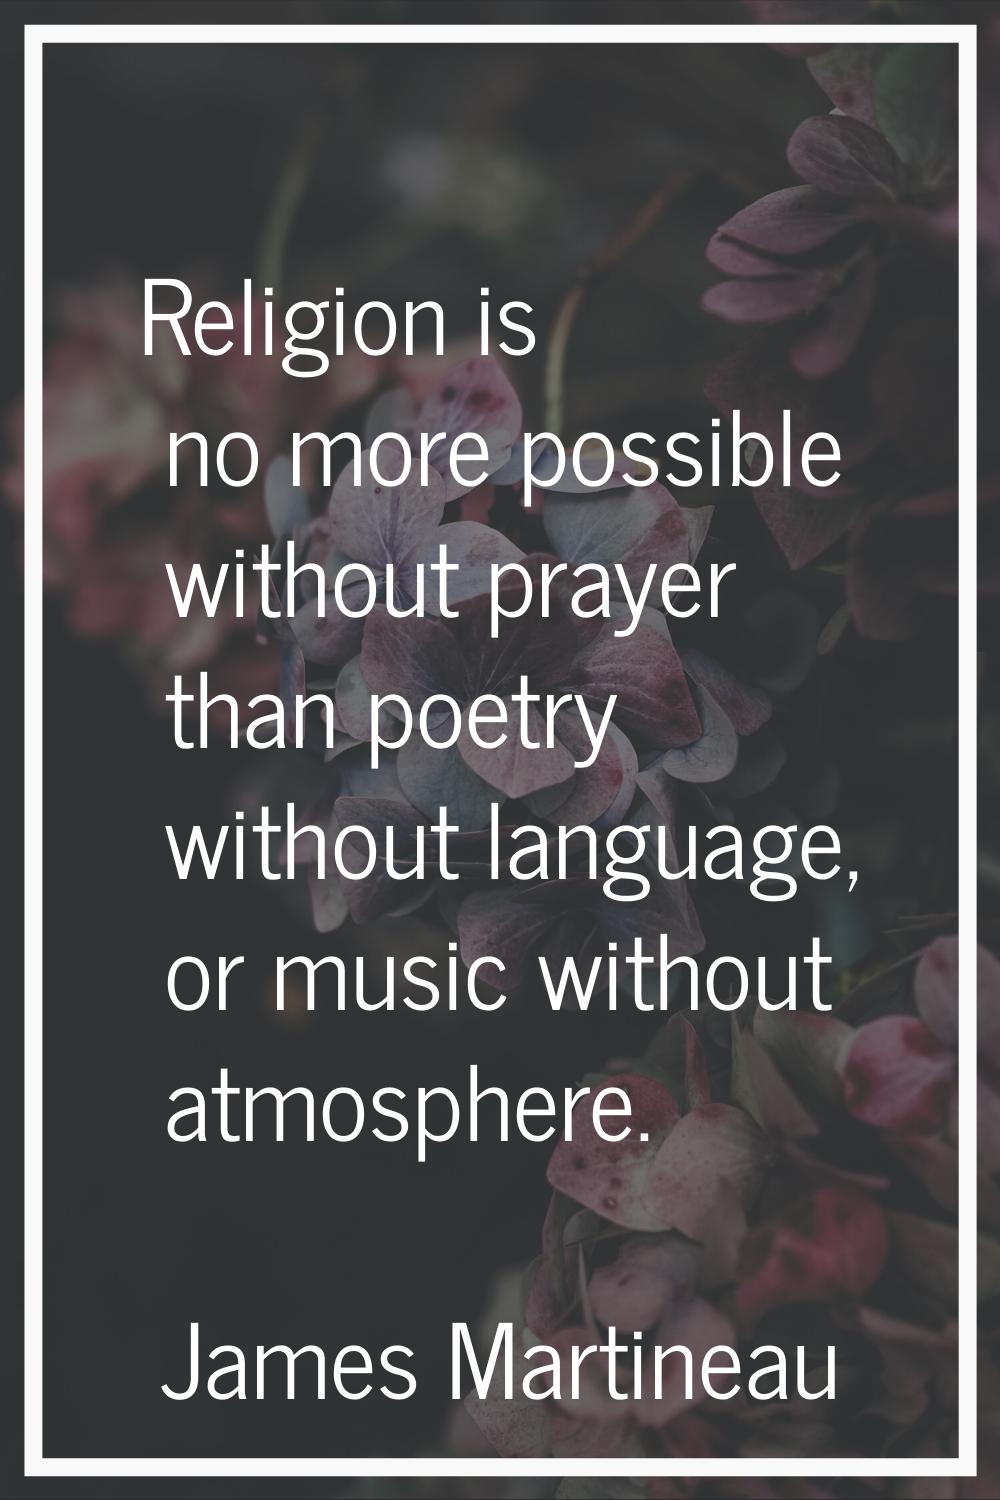 Religion is no more possible without prayer than poetry without language, or music without atmosphe